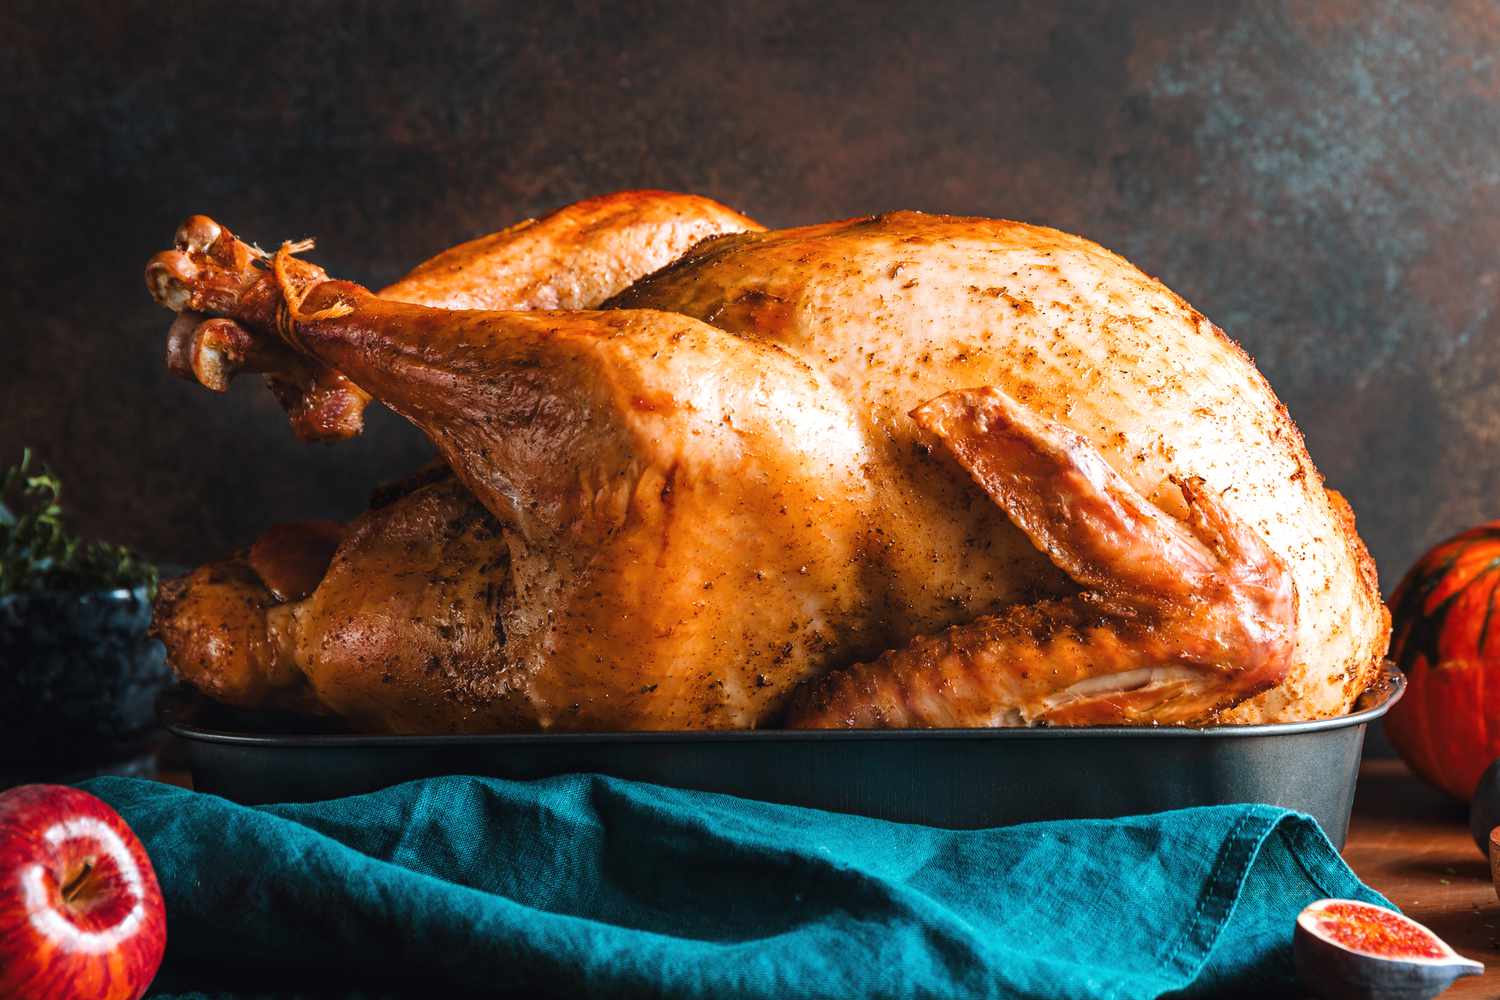 How Long Does It Take to Cook a Turkey?